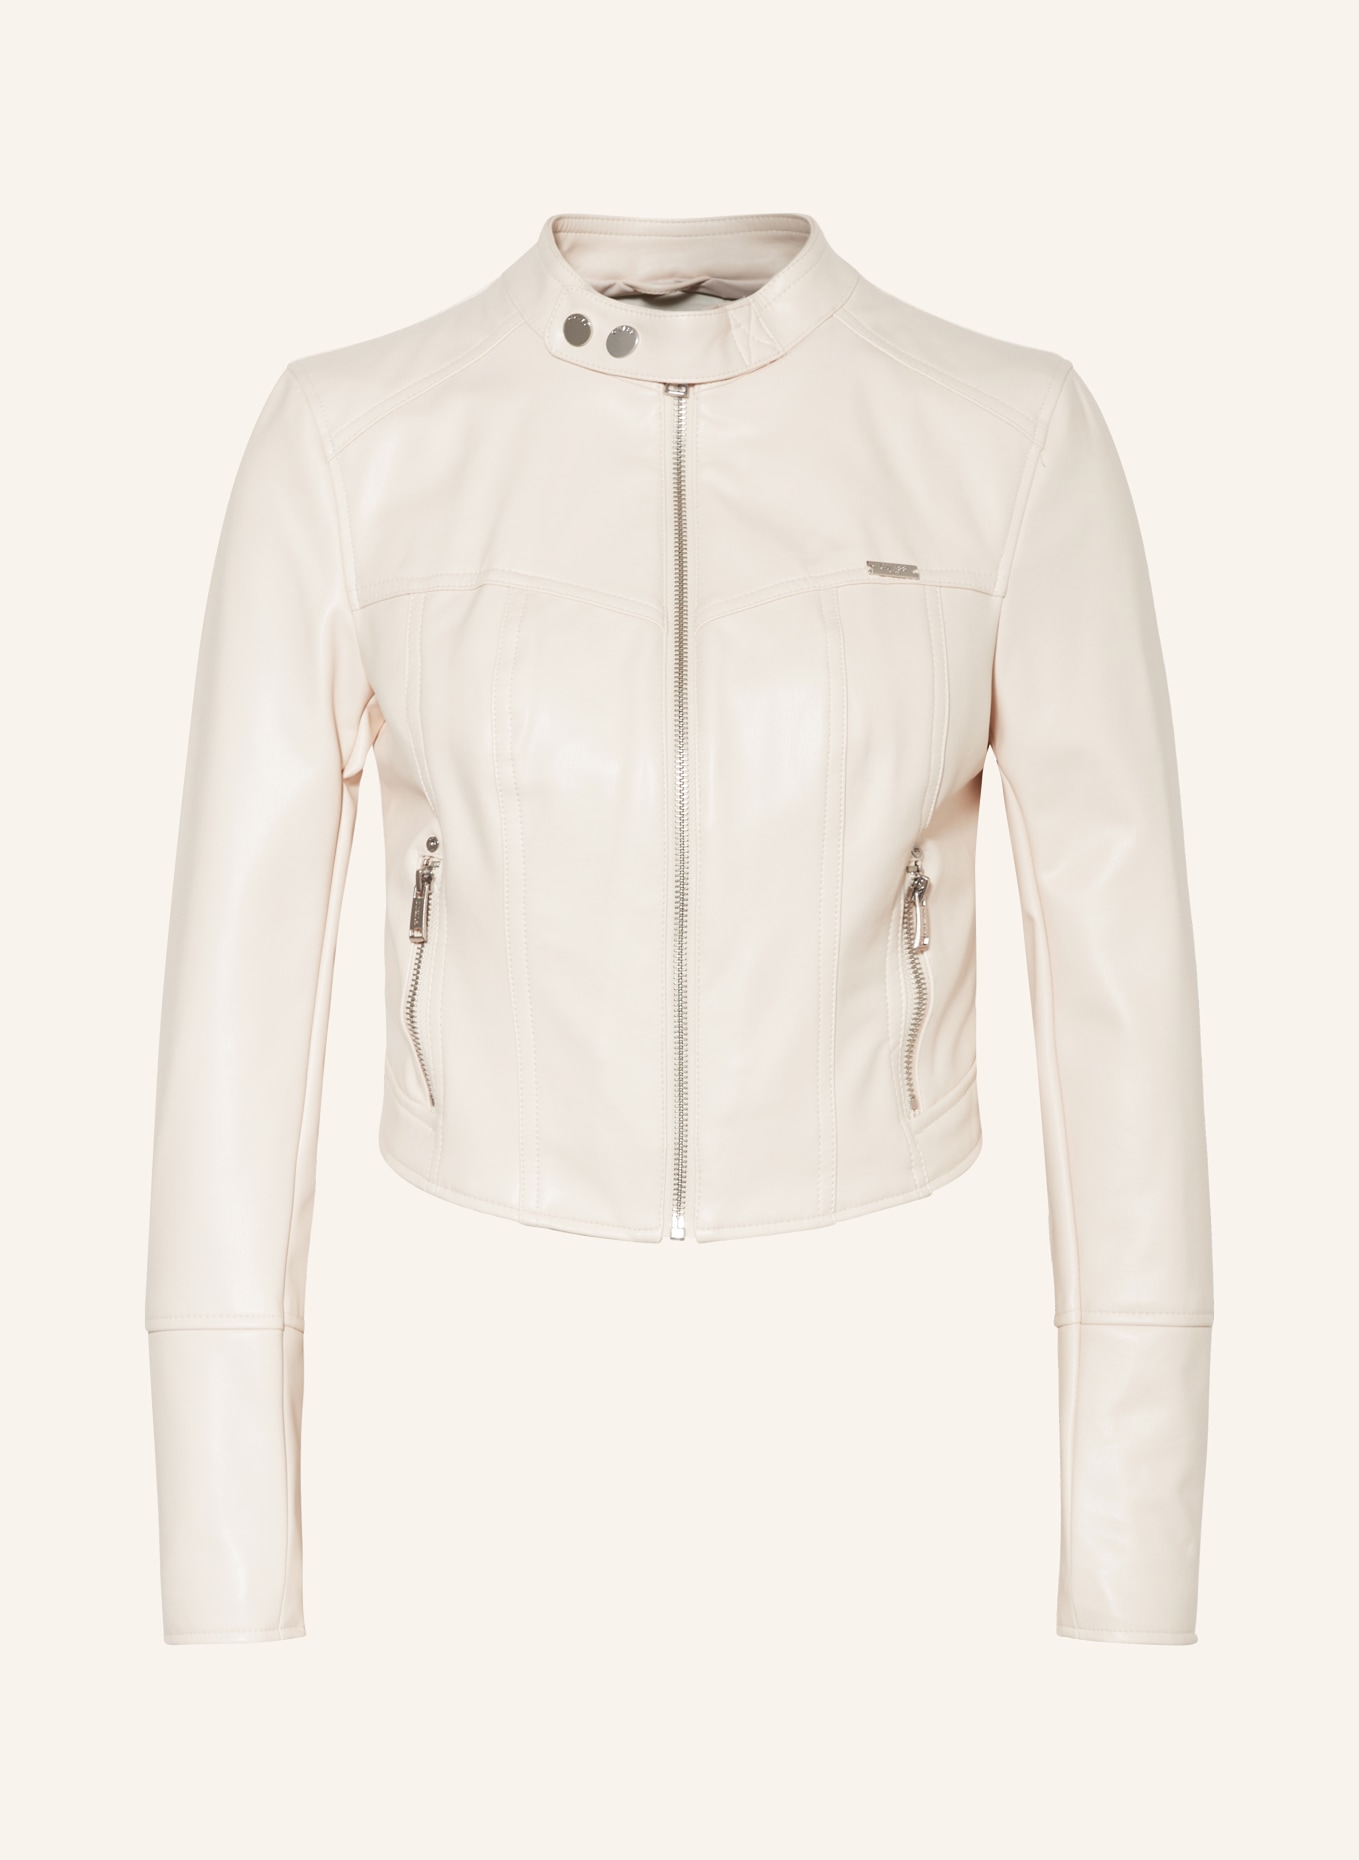 GUESS Jacket in leather look, Color: CREAM (Image 1)